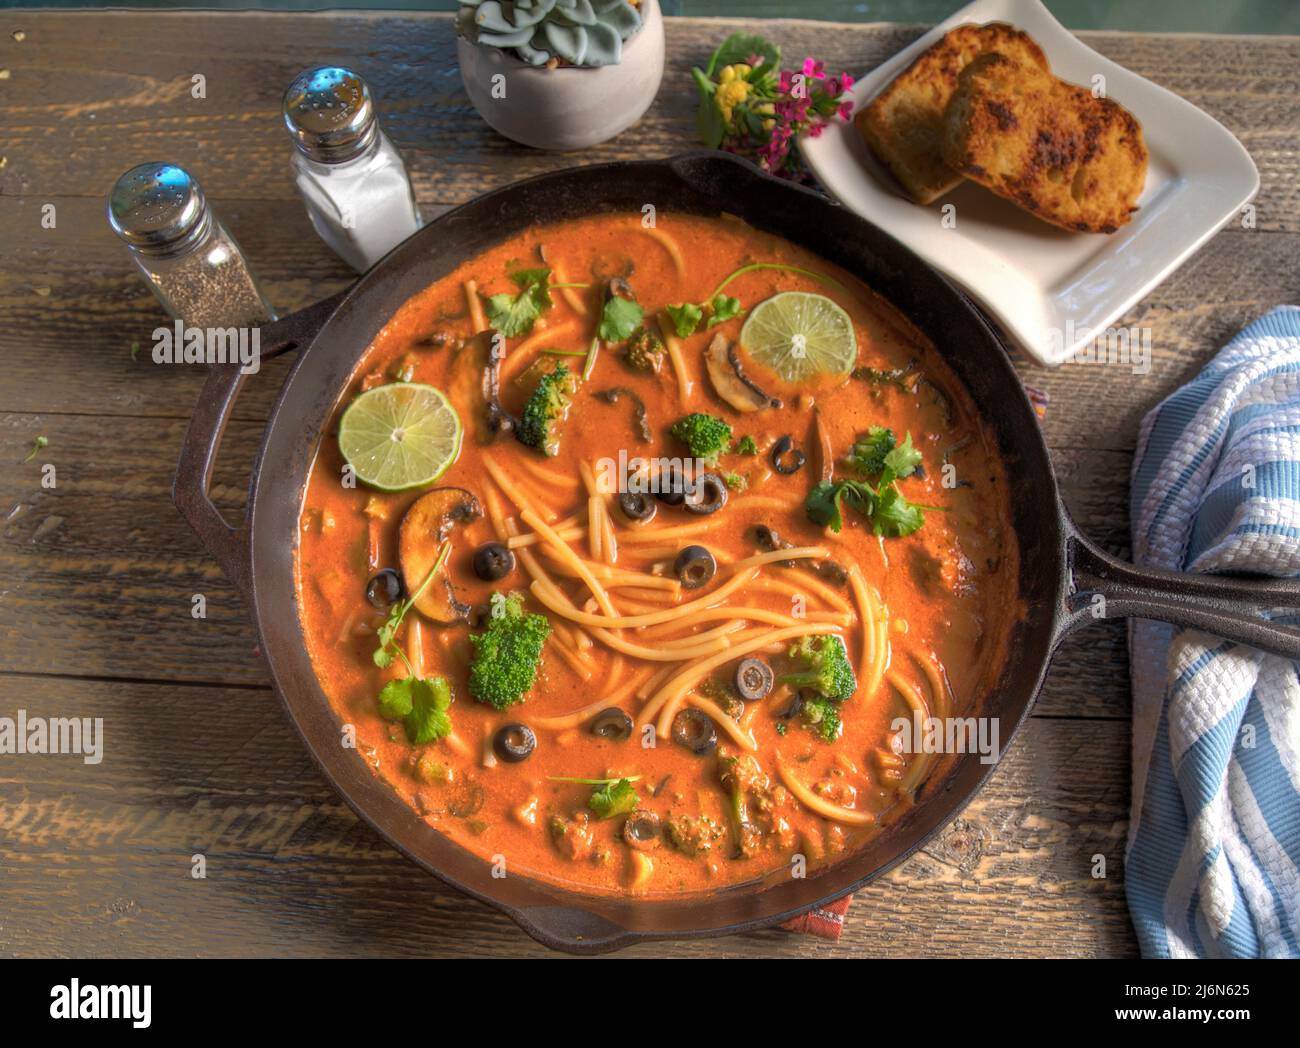 Top view of Red Thai Curry Noodle Soup on Natural Wood Table. Stock Photo